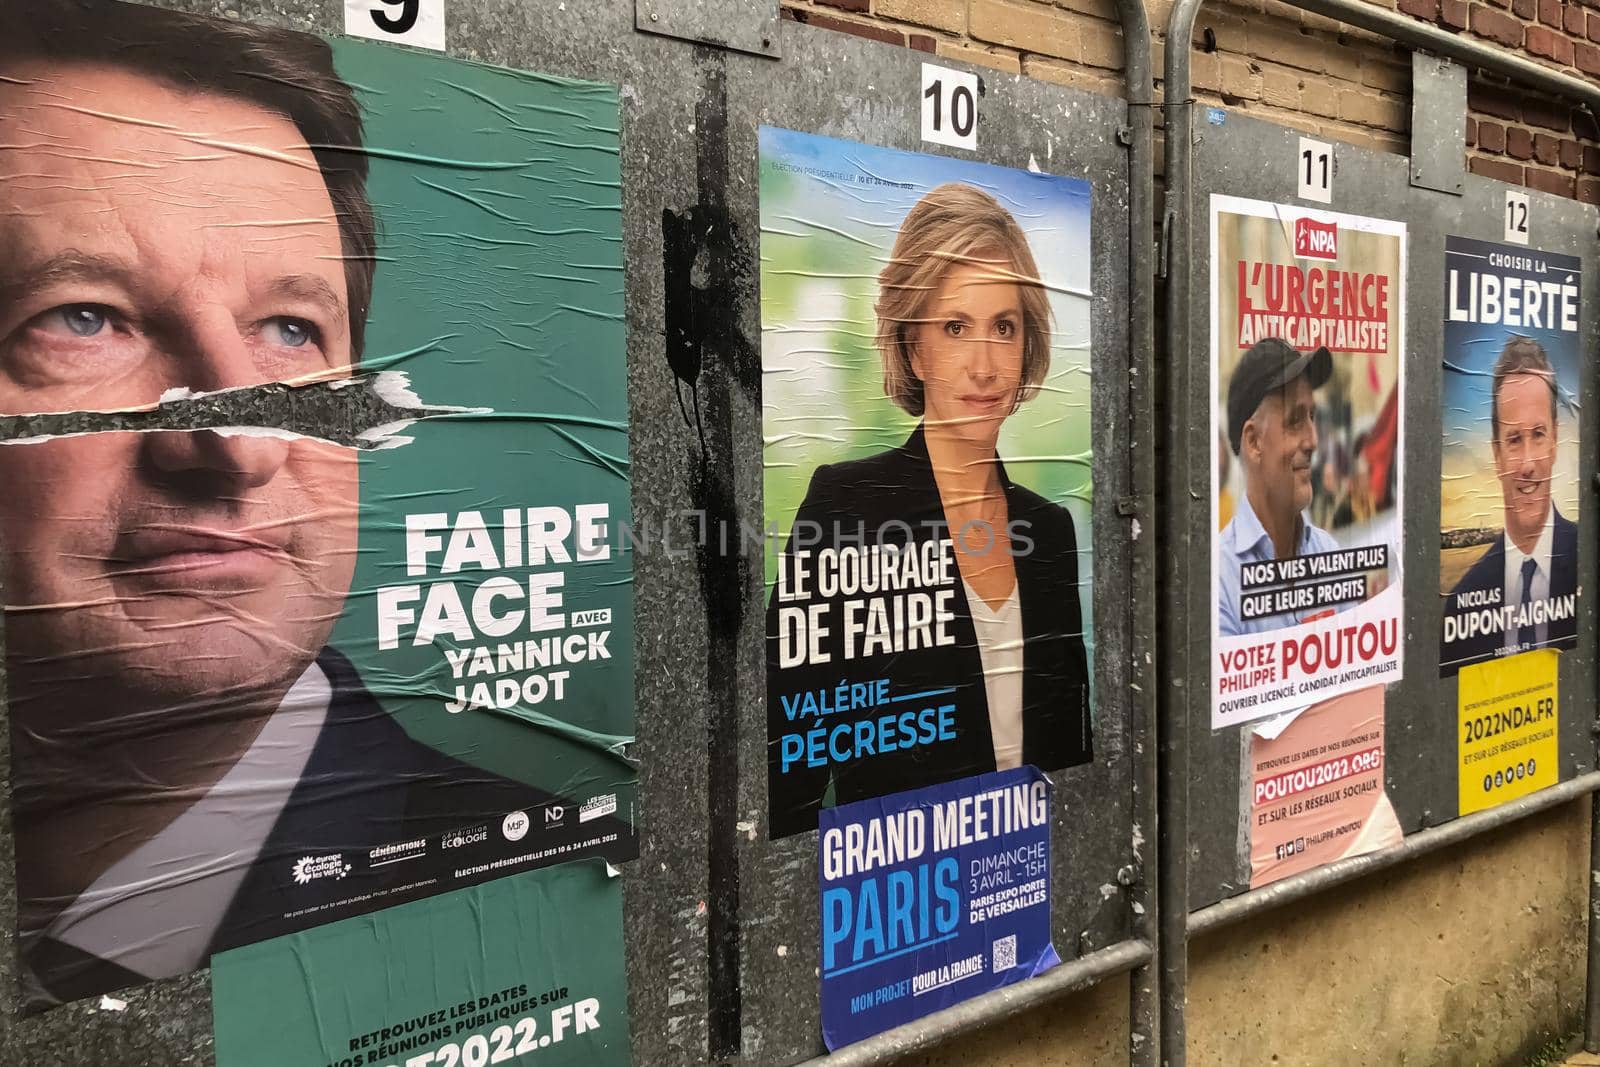 PARIS, FRANCE - APRIL 06, 2022 : The banners with candidates for President elections